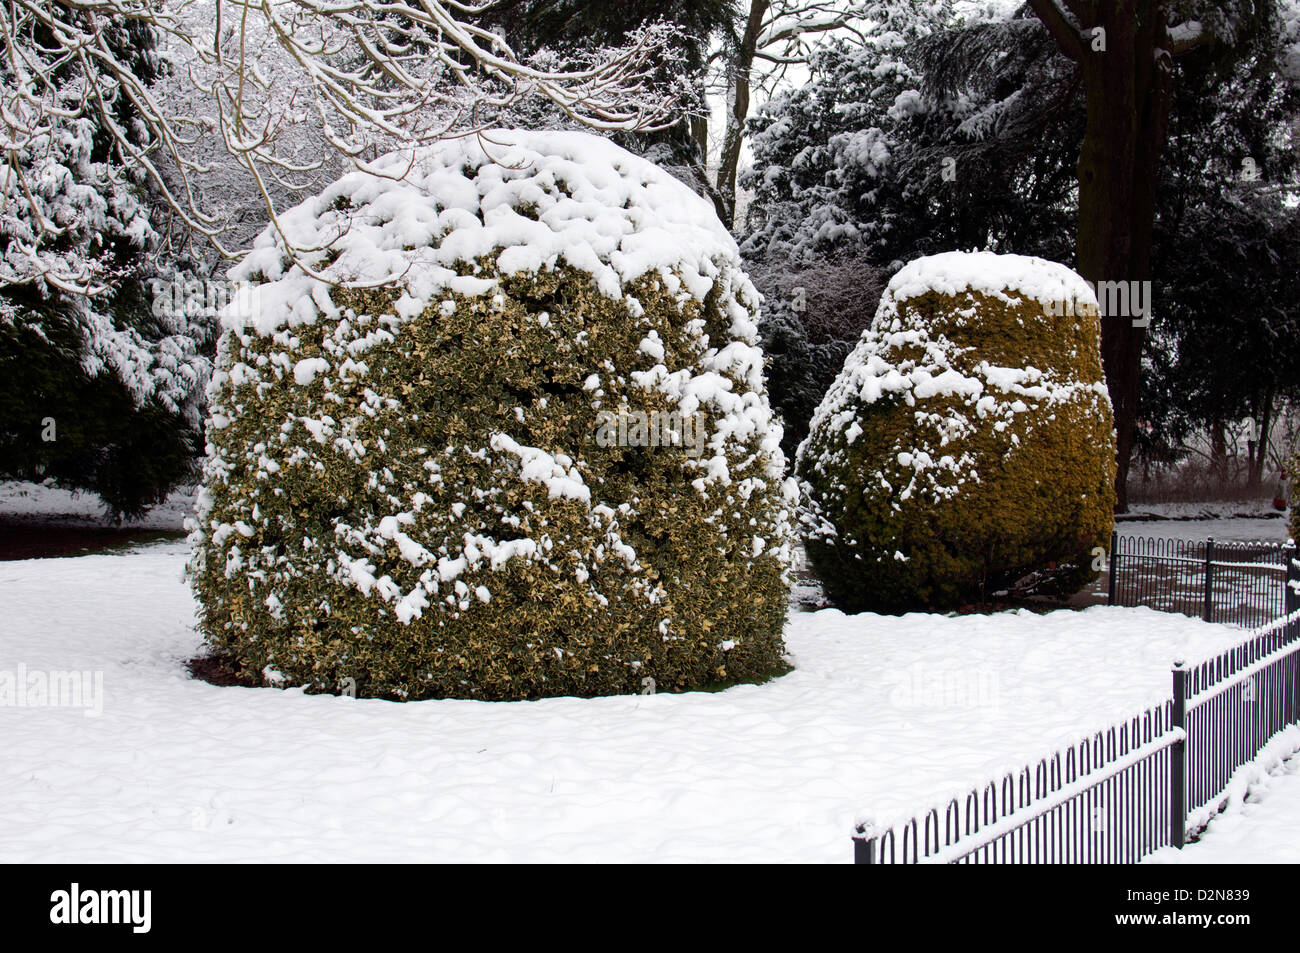 Holly and Yew bushes in winter with snow. Stock Photo